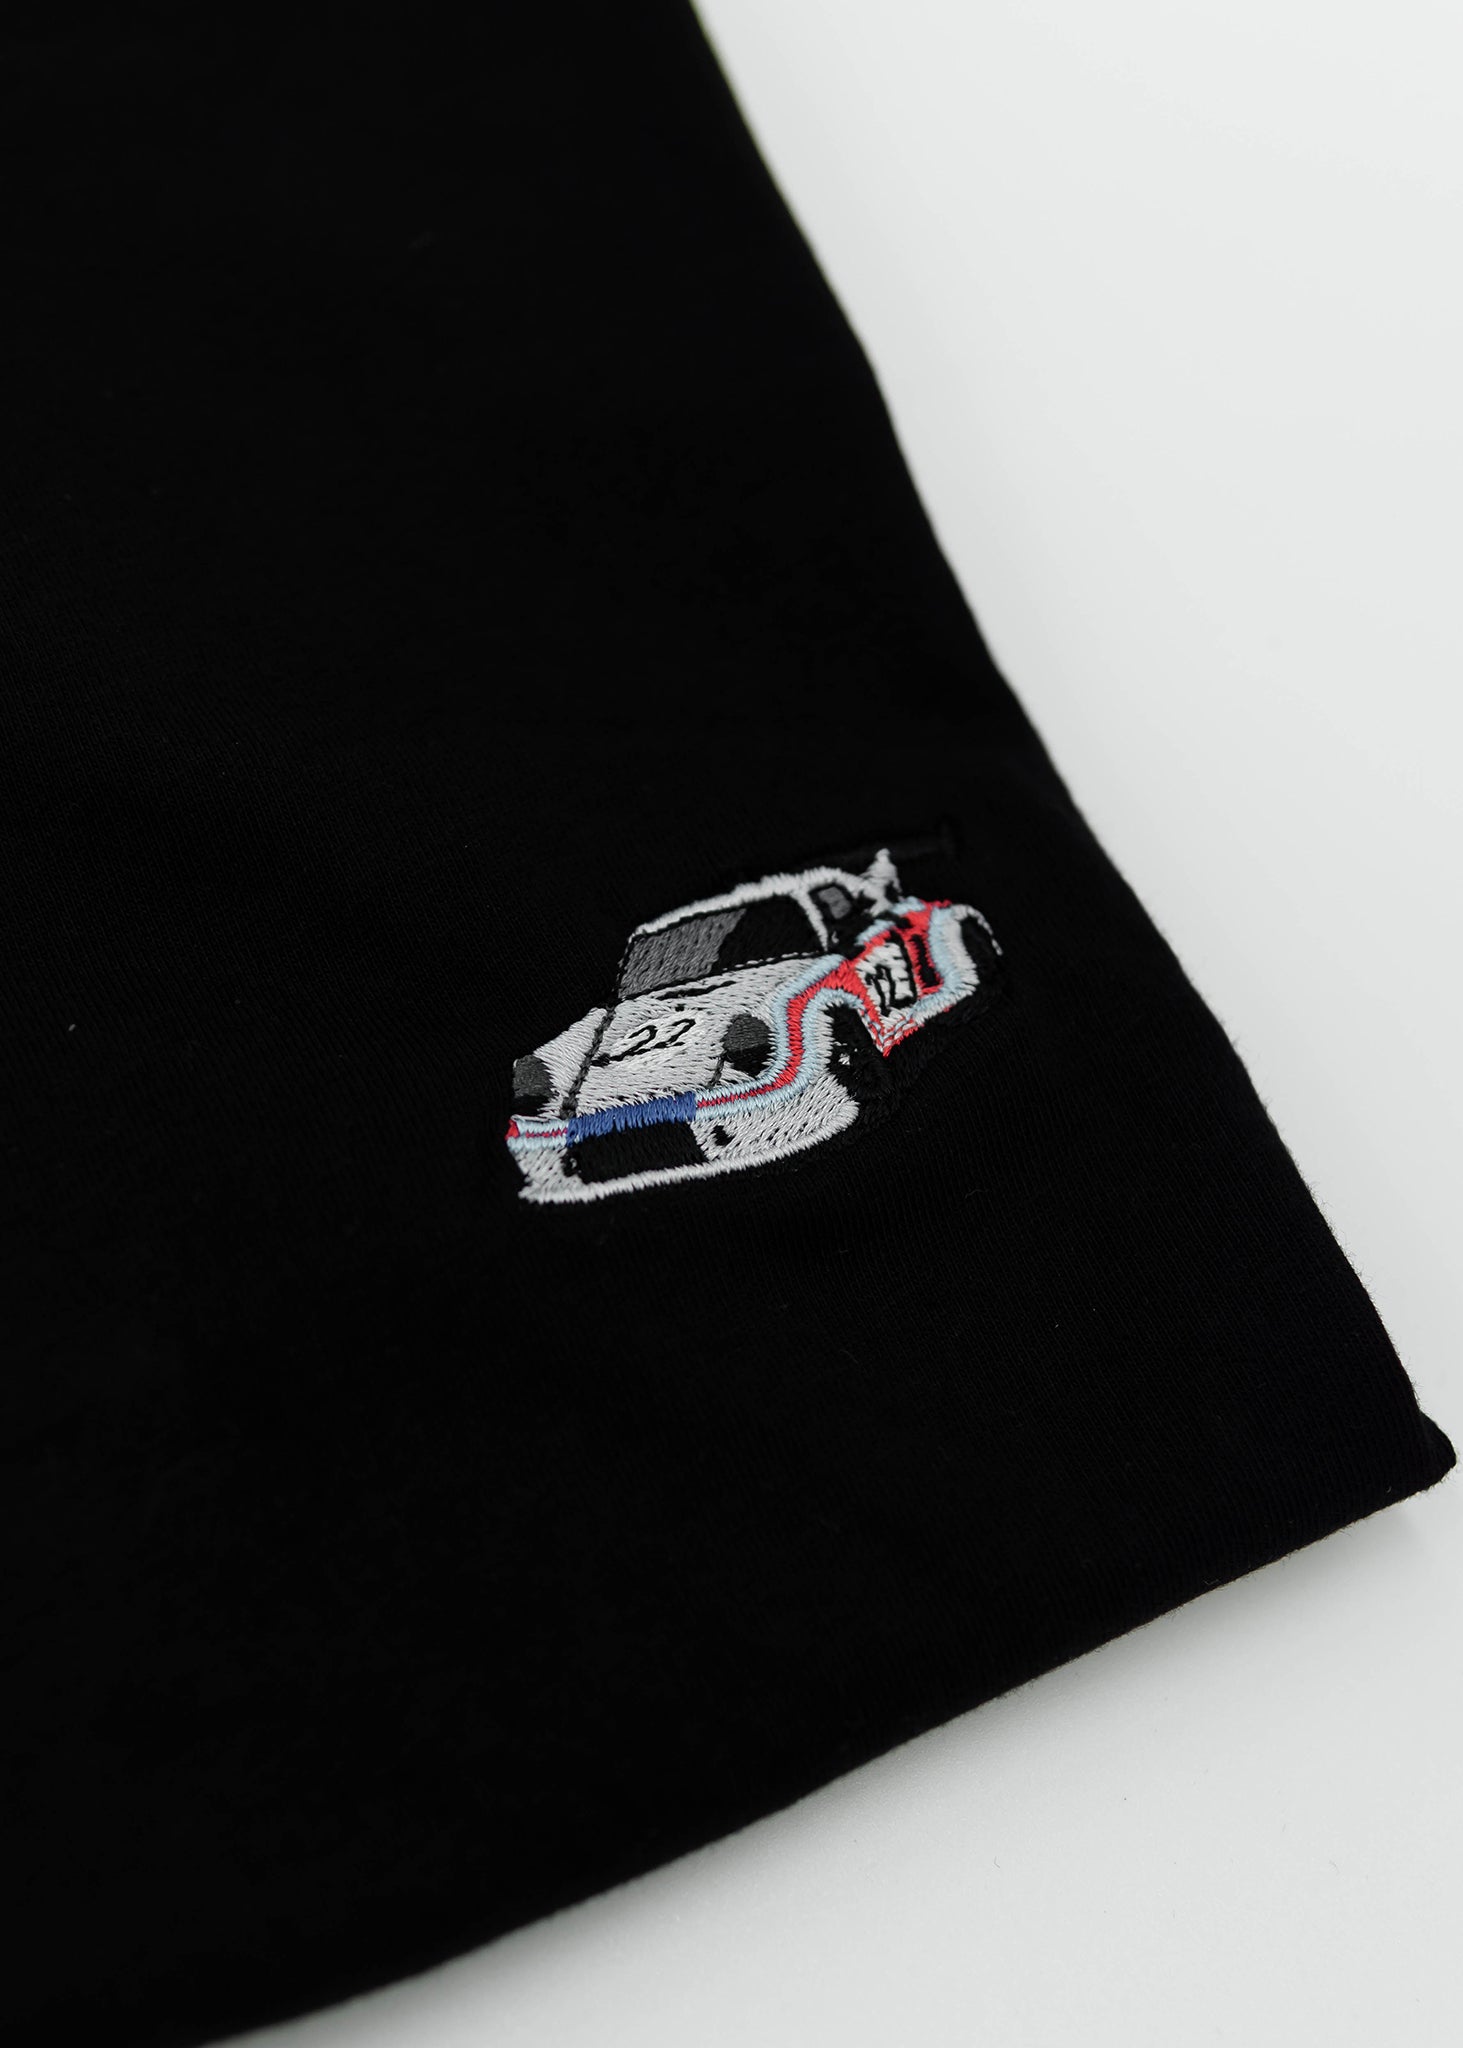 Close up of an embroidered R13 1974 911 RSR Turbo on a women's high quality cropped t-shirt. Photo shows the detailed embroidery of a R13 1974 911 RSR Turbo. Fabric composition of this tee is 100% cotton. The material is very soft, stretchy, and non-transparent. The style of this tshirt is a crewneck, short sleeve, cropped at the waist, with embroidery on the left chest.